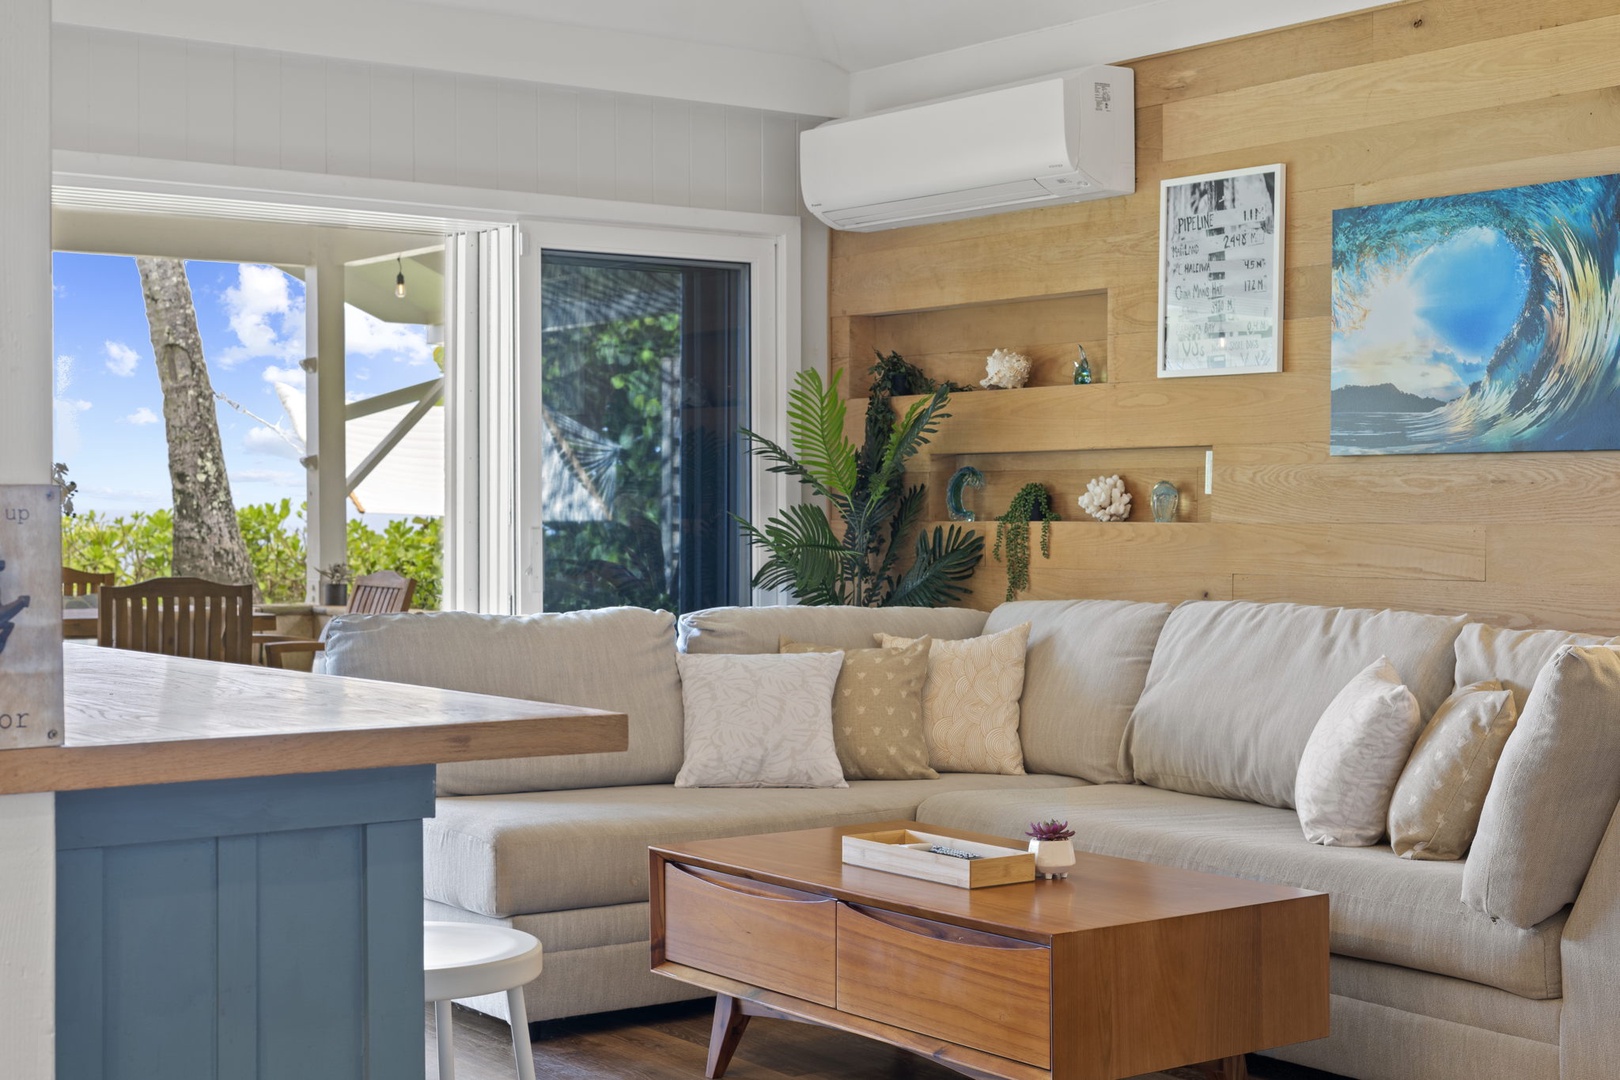 Haleiwa Vacation Rentals, Hale Nalu - Step into the bright, beachy lower-level living area, complete with a plush sofa, a flat-screen TV, and pocket doors framing exquisite views—your warm welcome to our beachfront home.